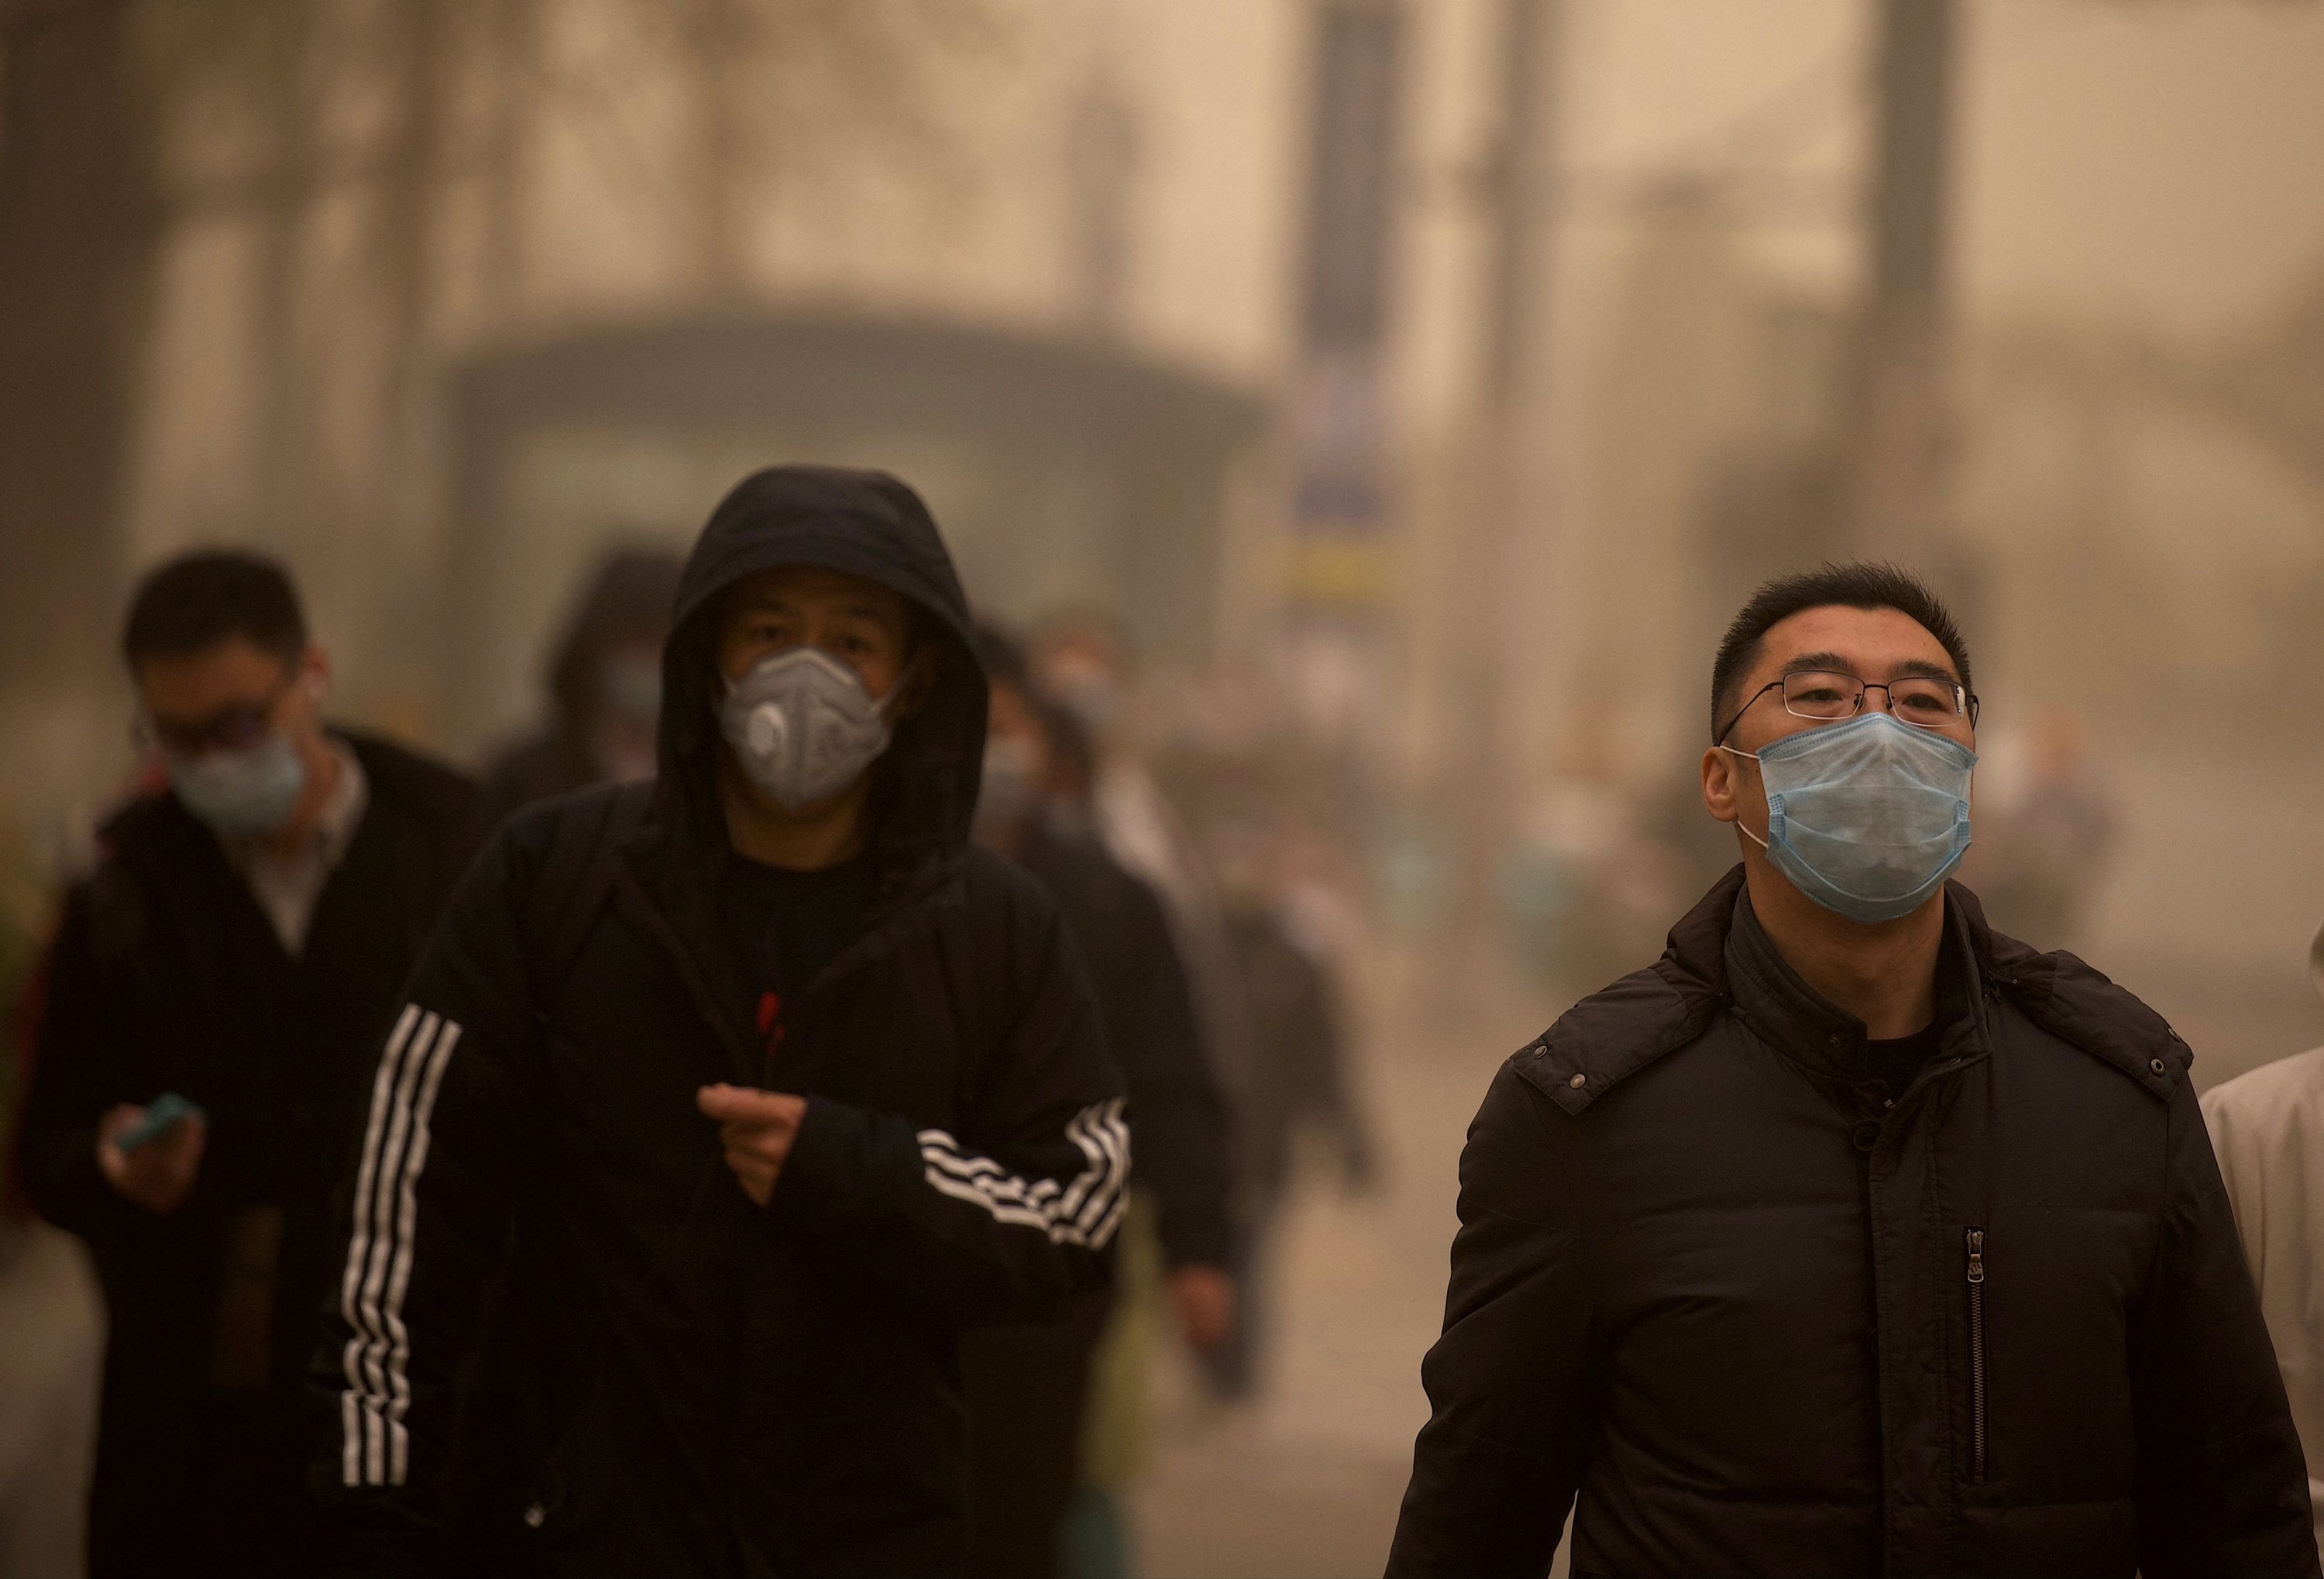 People walk along a street during a sandstorm in Beijing, China, March 15, 2021. (AFP Photo)